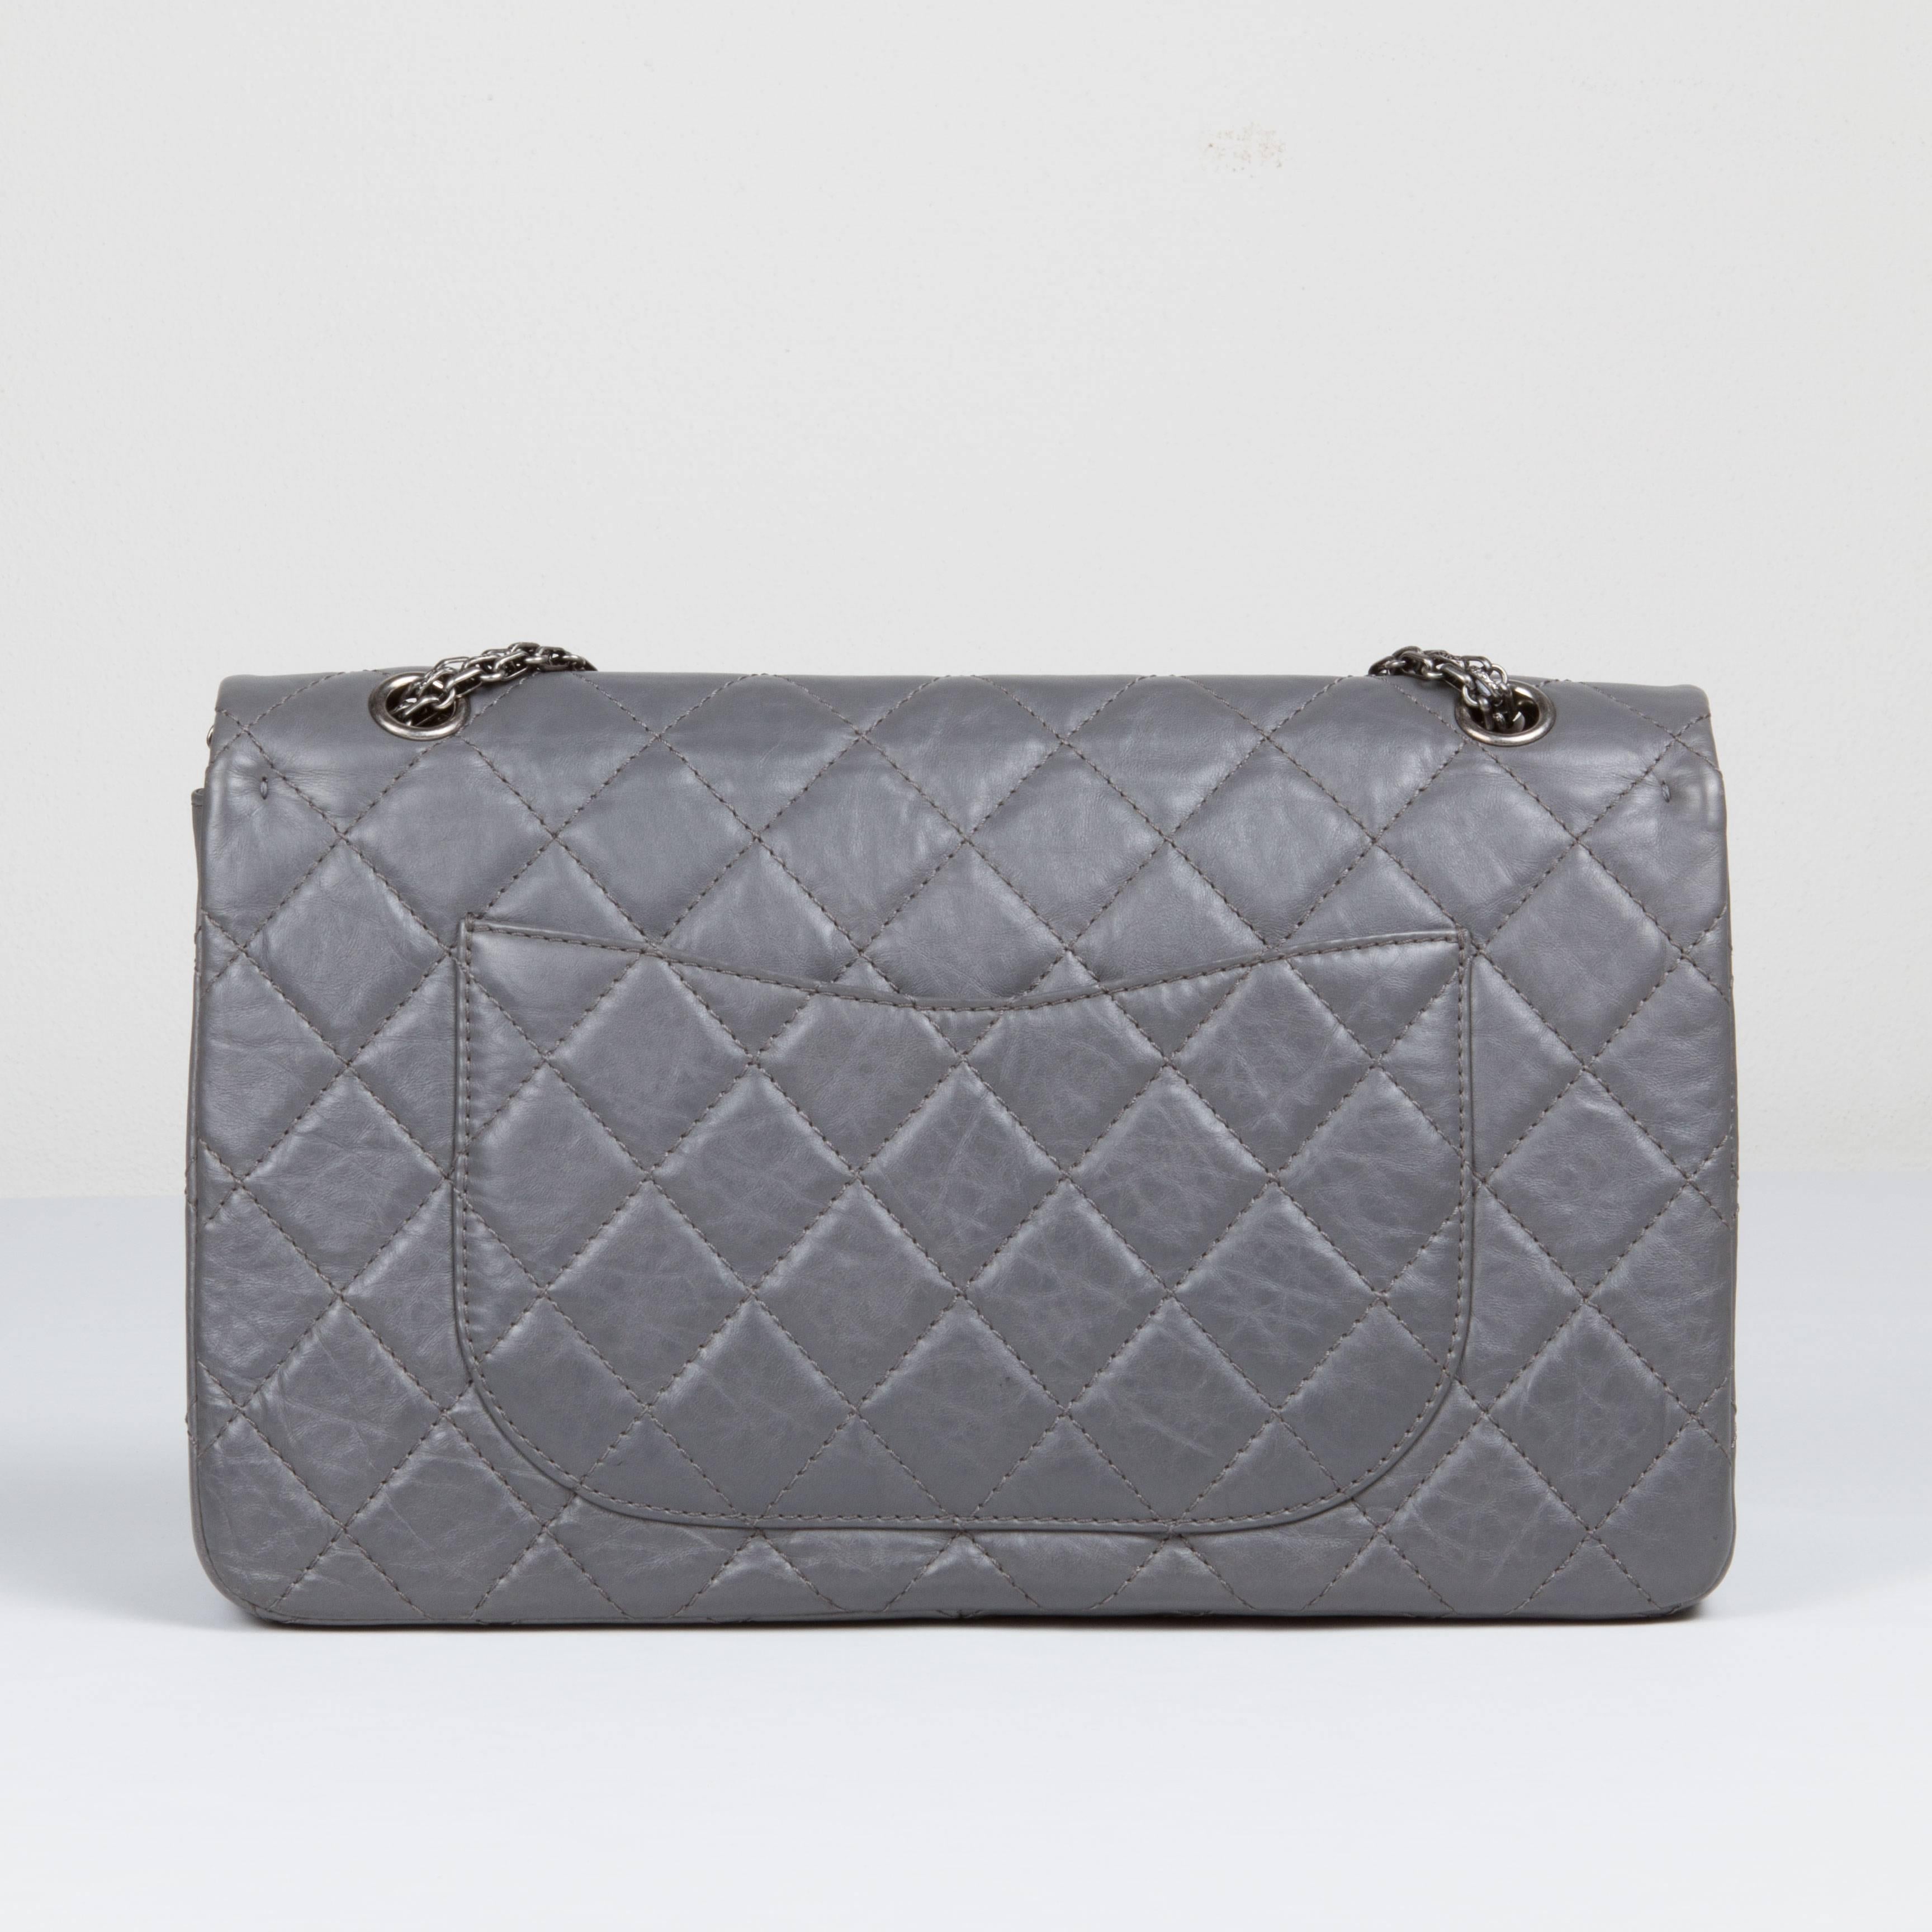 Chanel Reissue 227 double flap in grey distressed leather.
Ruthenium hardwares.
The bag comes with its original set (box, dustbag and card).
Code 14.
Excellent conditions.